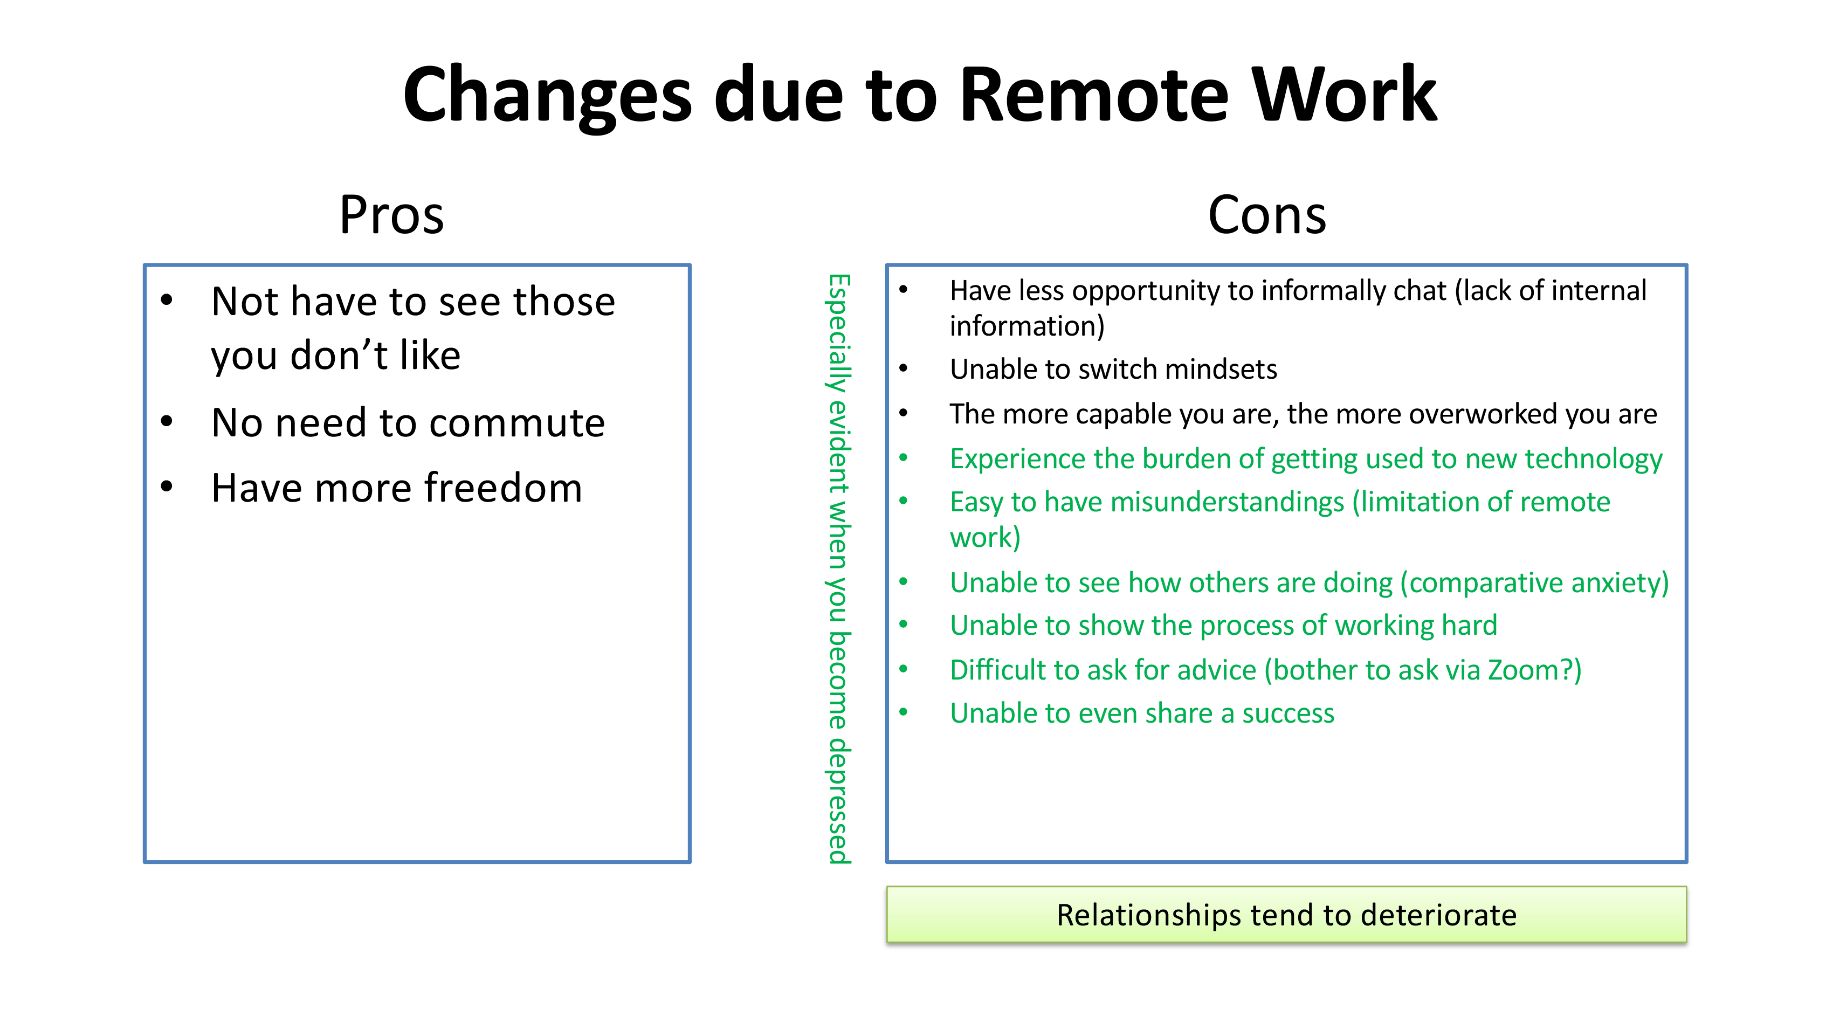 Changes due to Remote Work